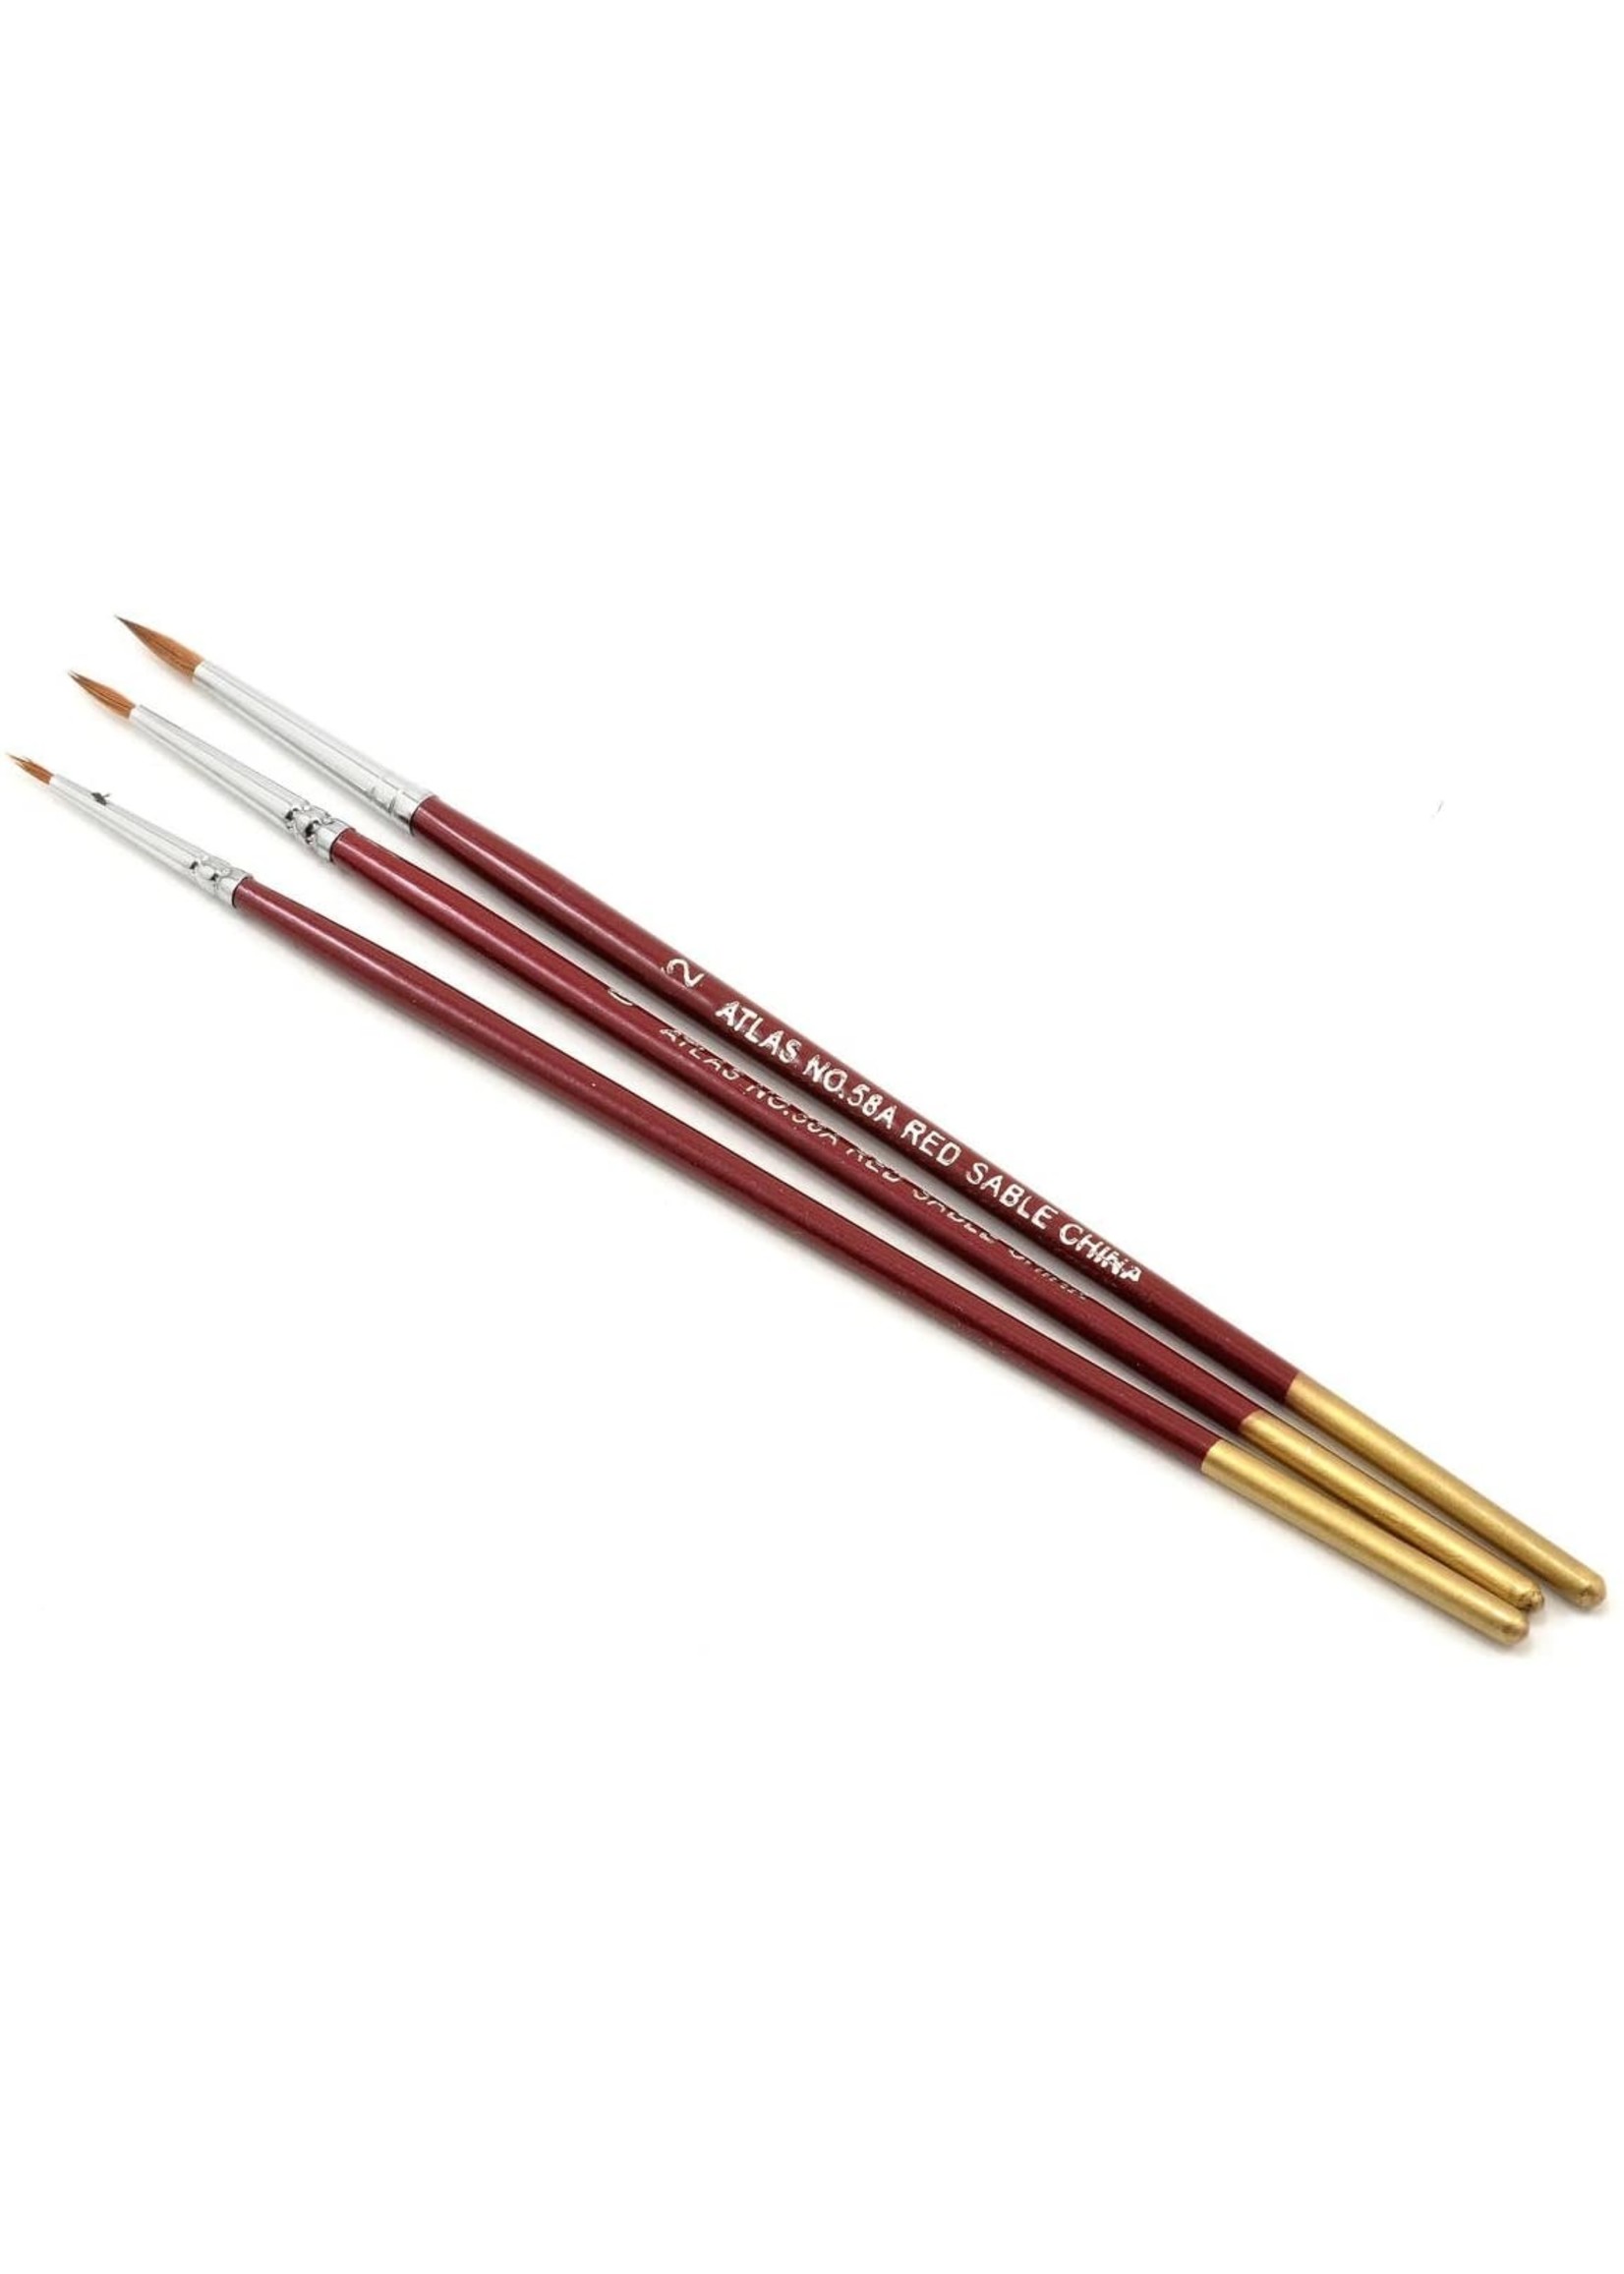 Atlas Brush Co. 58A - Red Sable 3 Piece Brush Set, 5/0-0-2